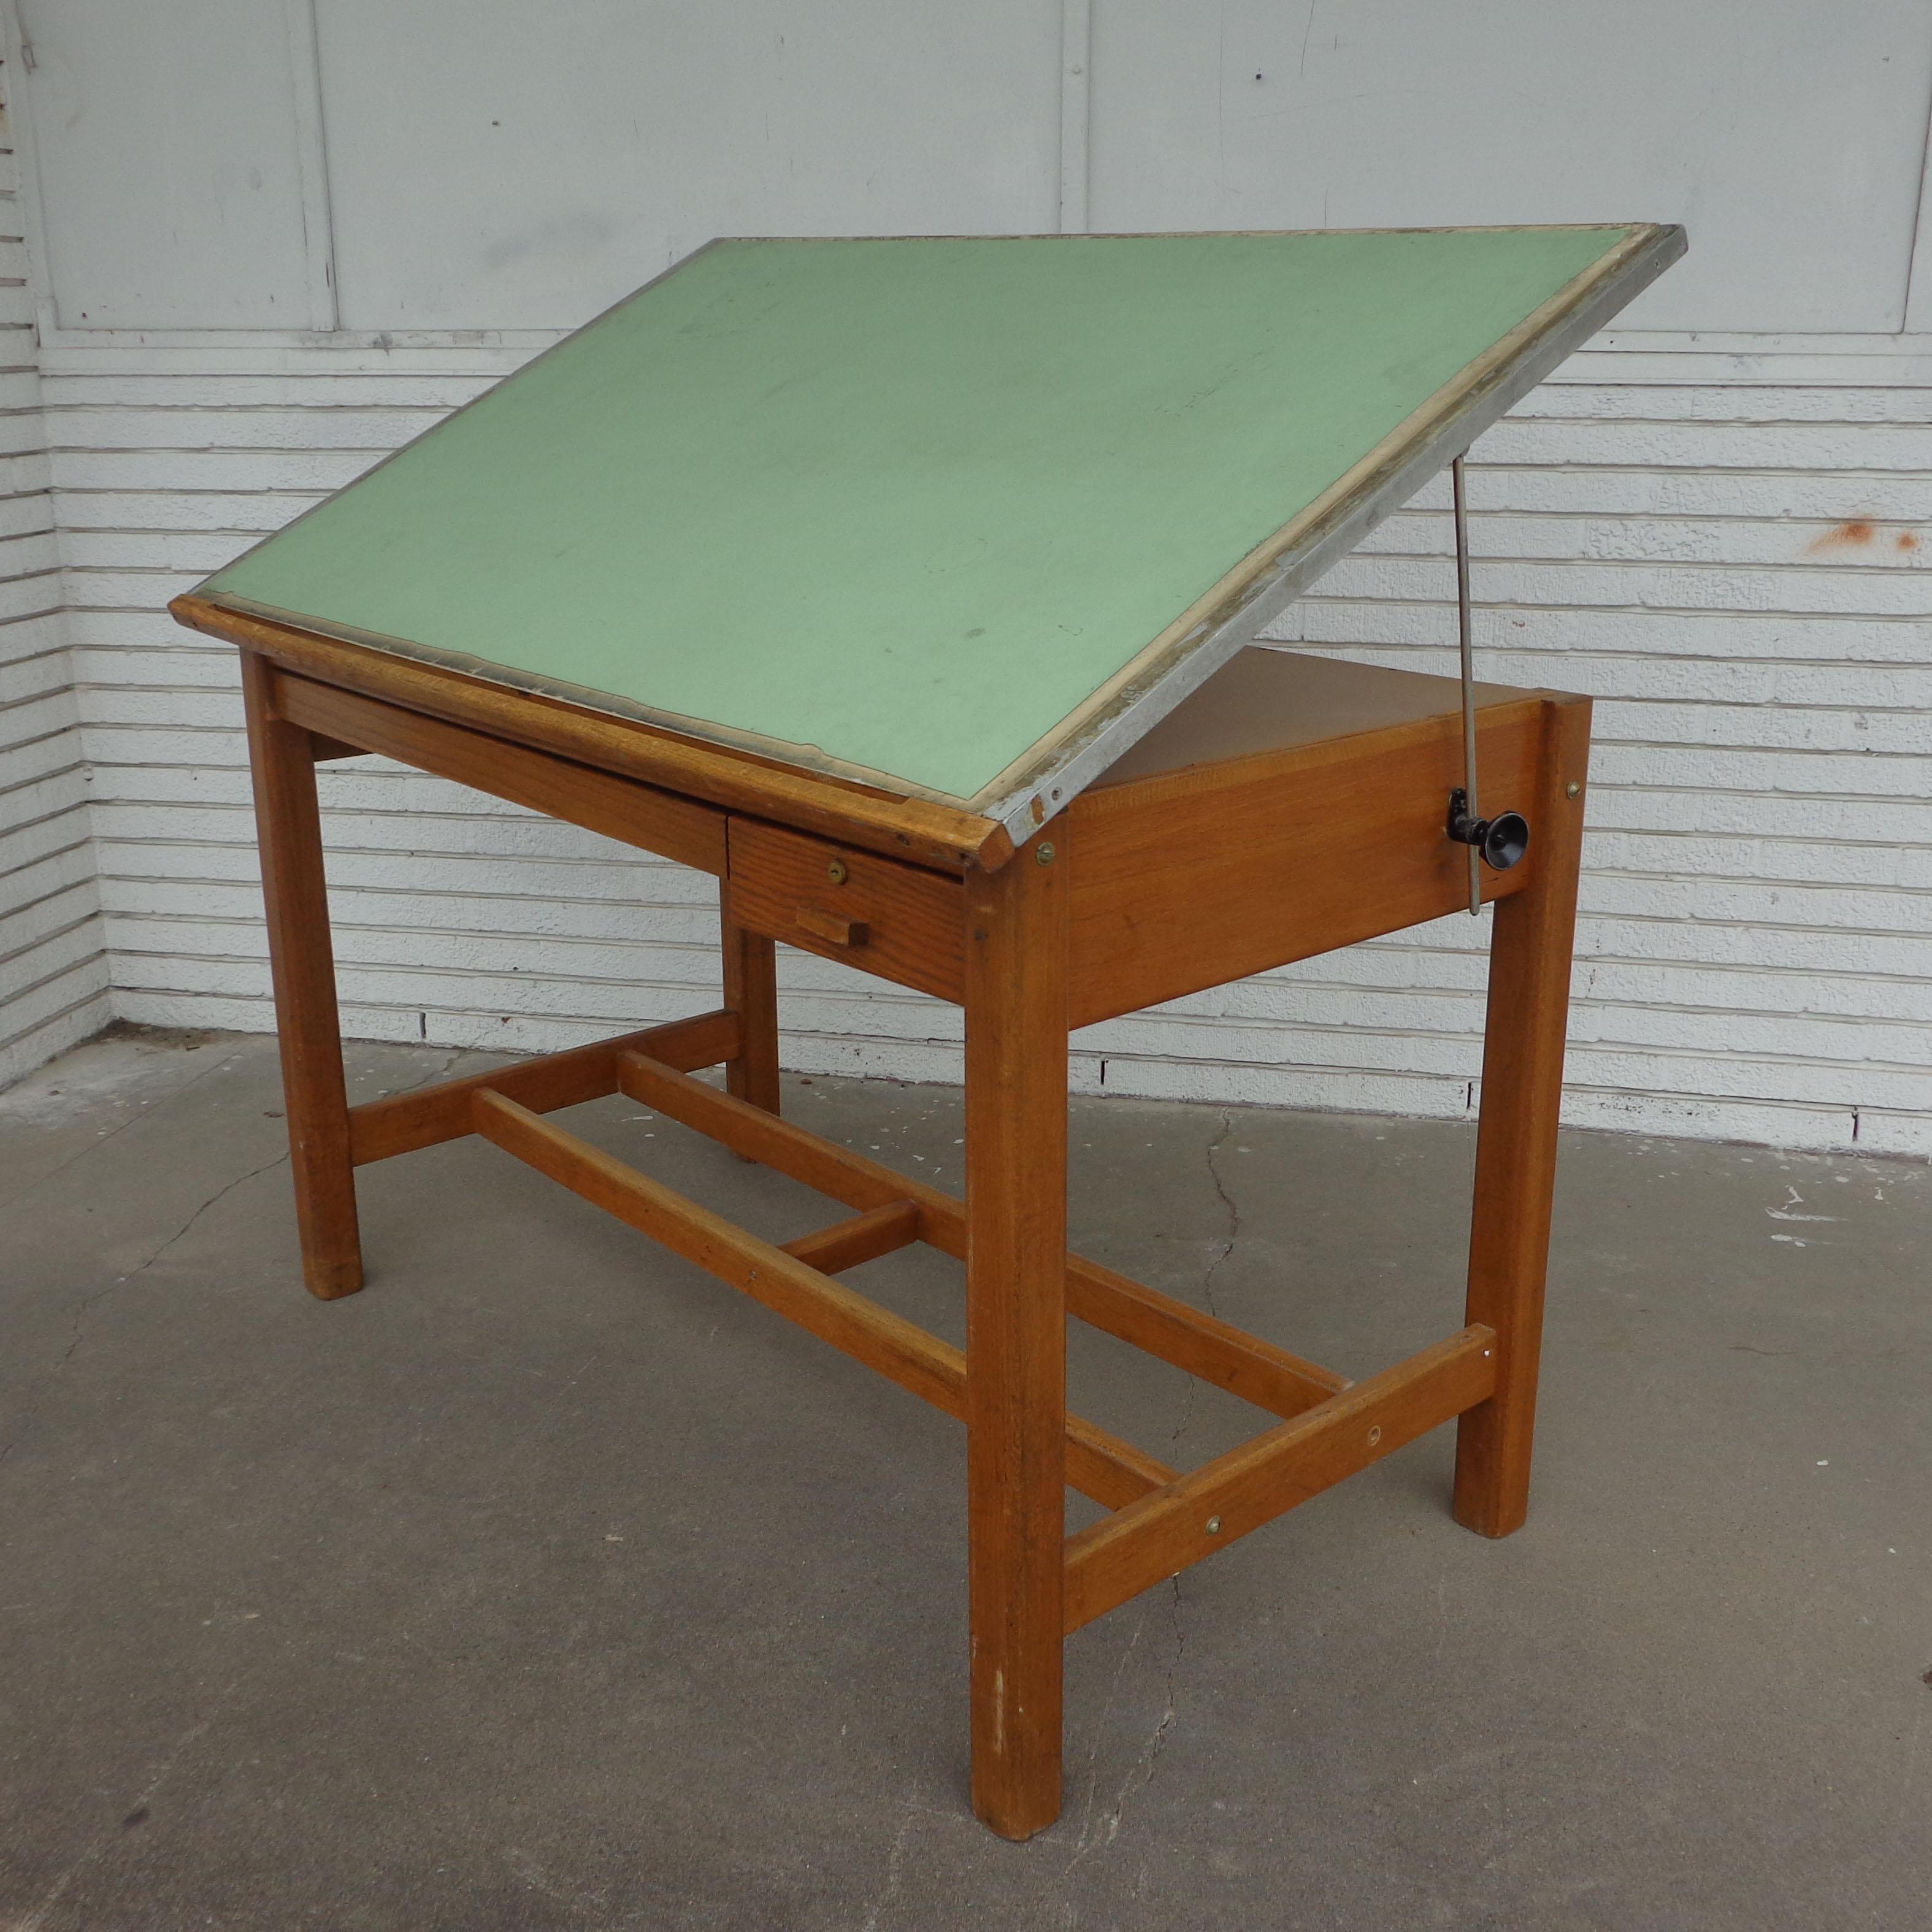 Vintage drafting table standing desk

Versatile mid century oak drafting table or standing desk.
Adjustable top featuring two drawers, one serving for drawing storage. 
 